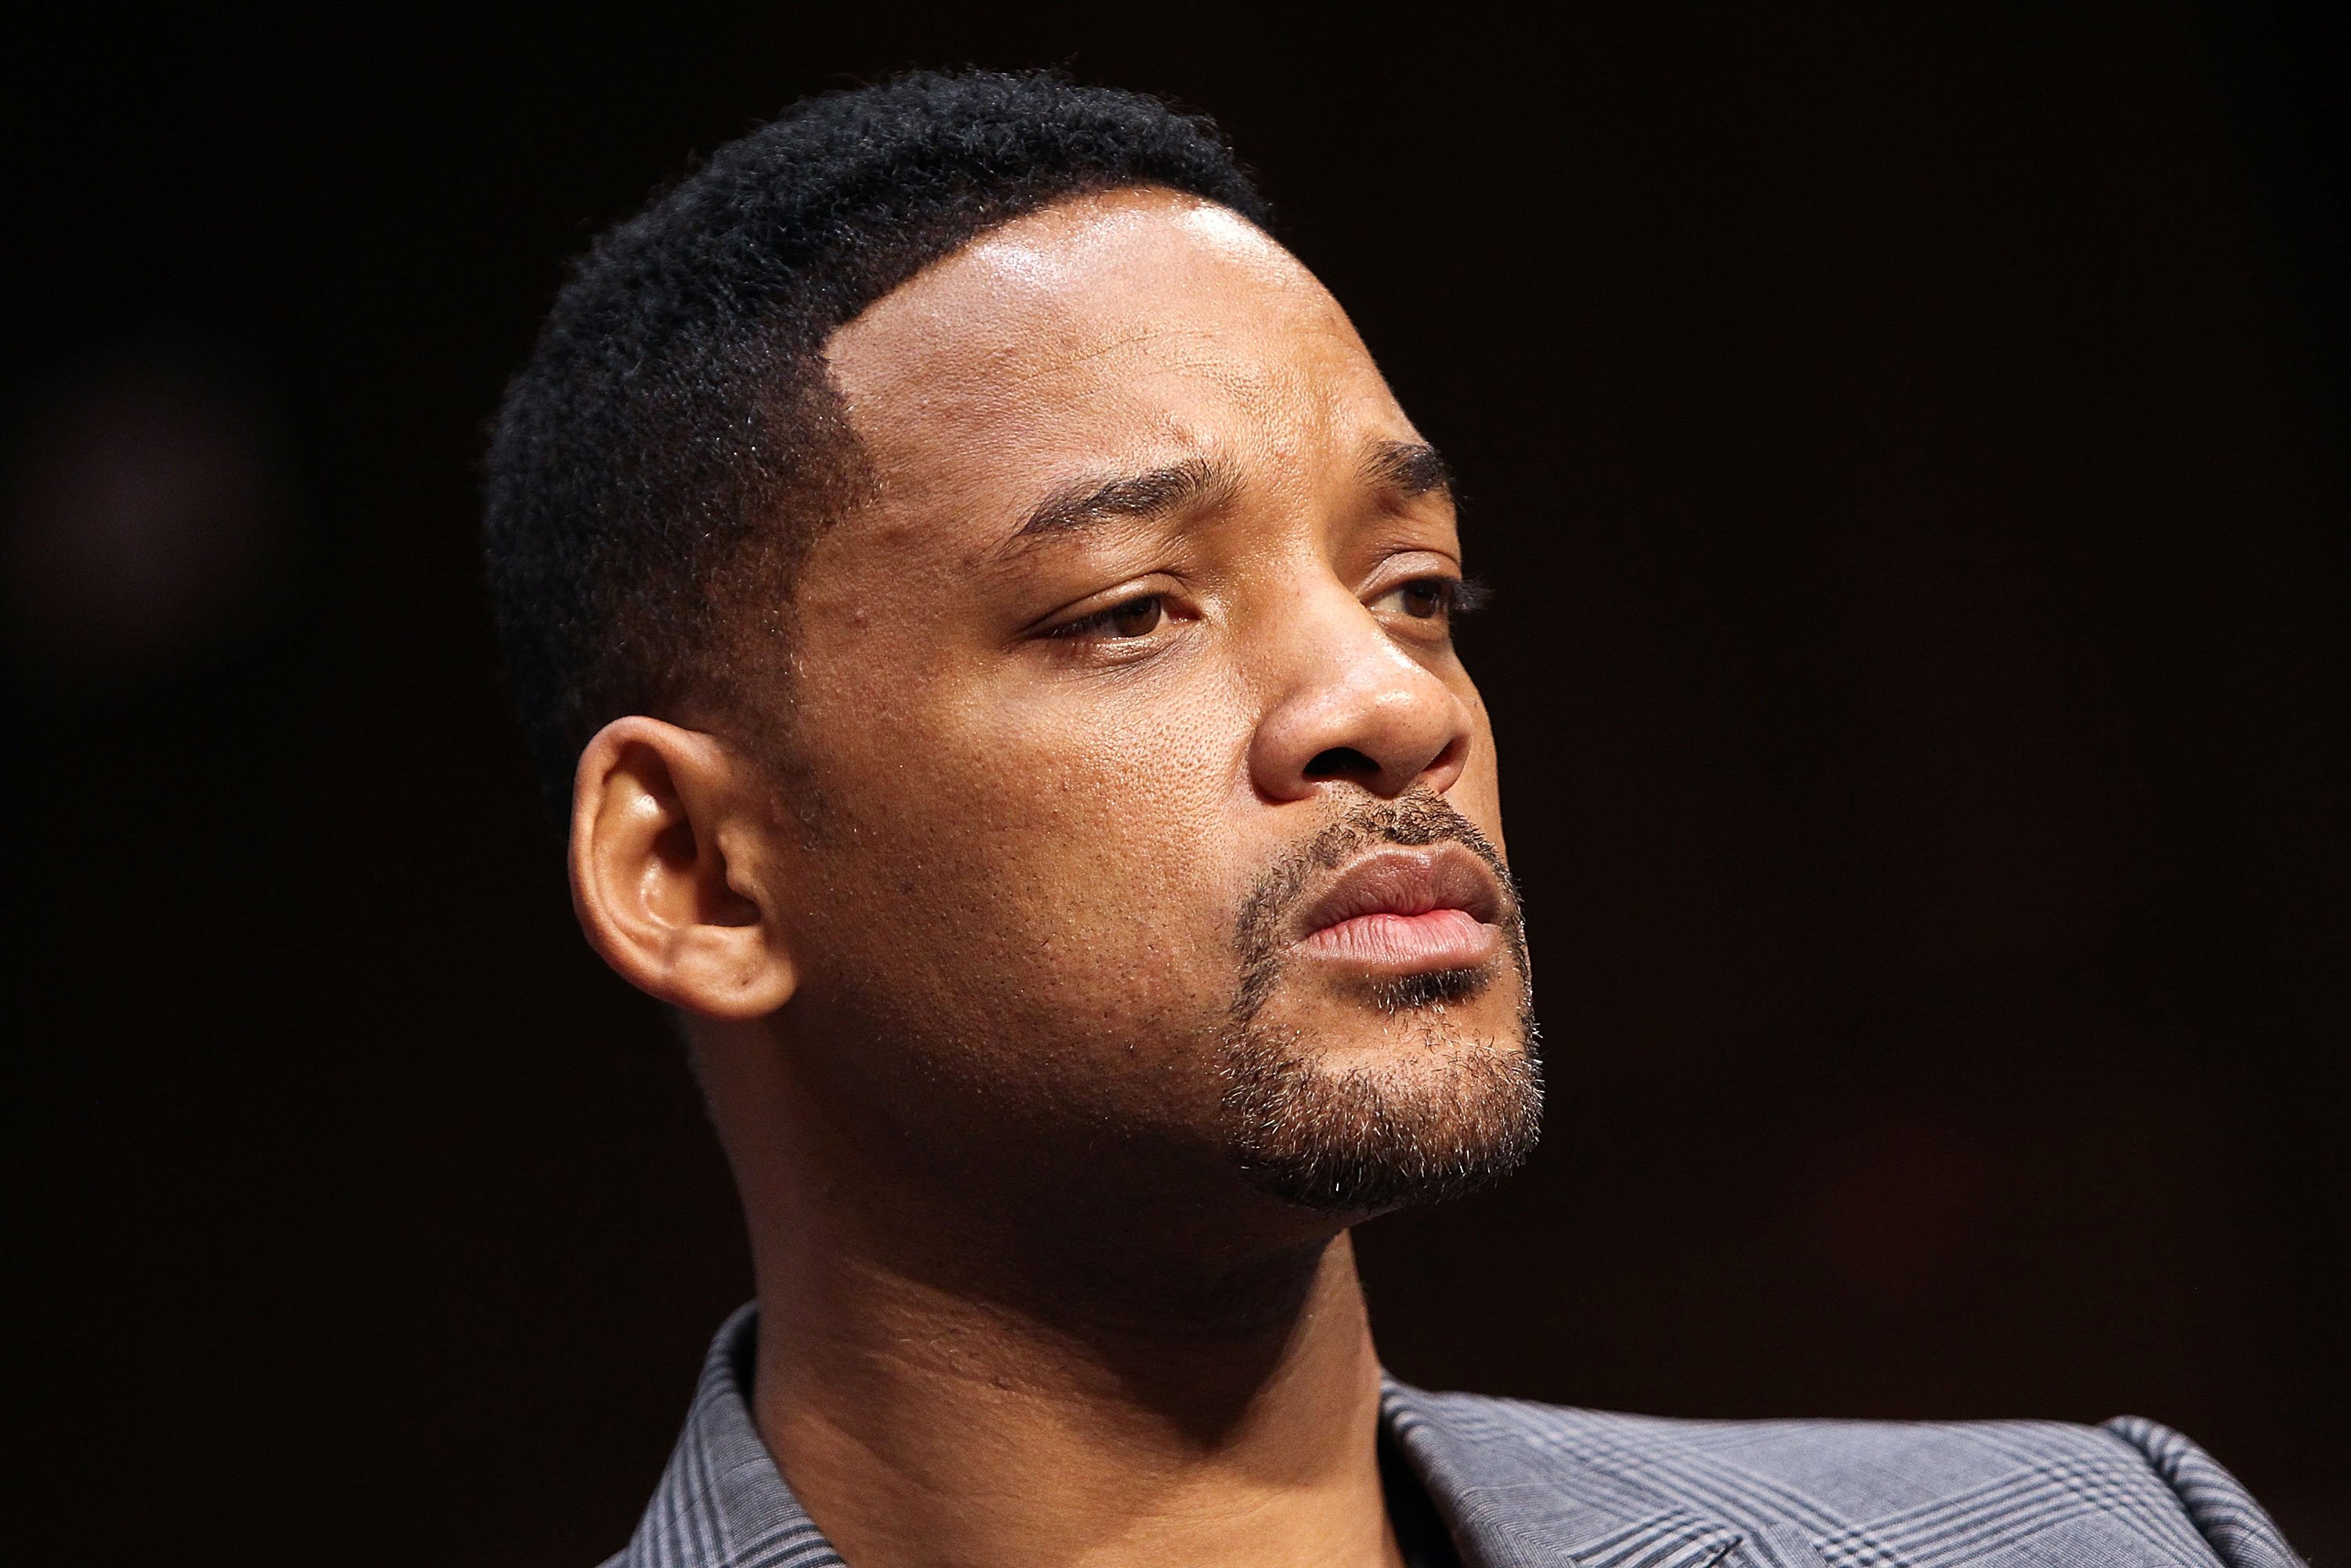 Will Smith at the "The Next Ten Years In The Fight Against Human Trafficking: Attacking The Problem With The Right Tools" Committee Hearing on July 17, 2012, in Washington, DC. | Source: Paul Morigi/WireImage/Getty Images